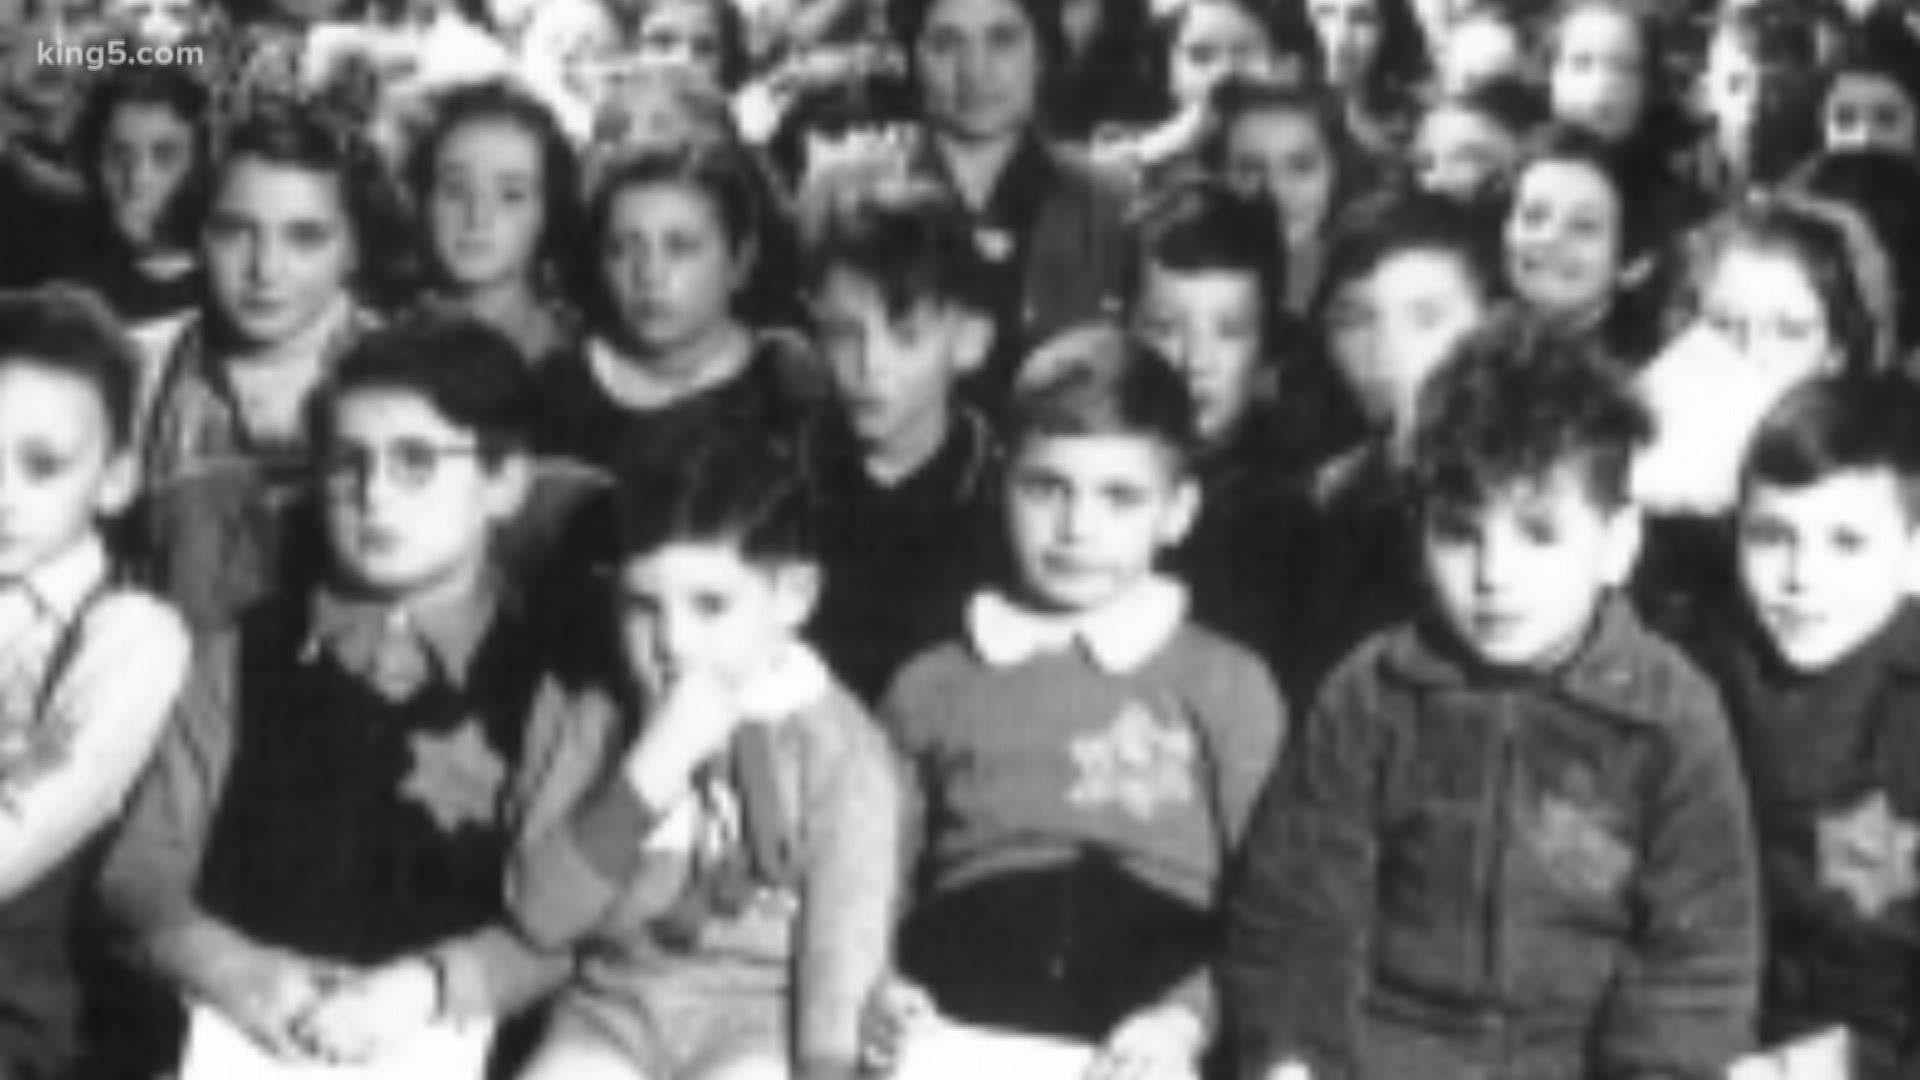 A new state law encourages teachers to include the history of the Holocaust as part of their lesson plans. The law encourages schools to include the topic, but the Holocaust could soon be required teaching. But as long as teaching it remains optional, one Holocaust survivor is making sure his memories are never forgotten. South Bureau Chief Drew Mikkelsen reports.